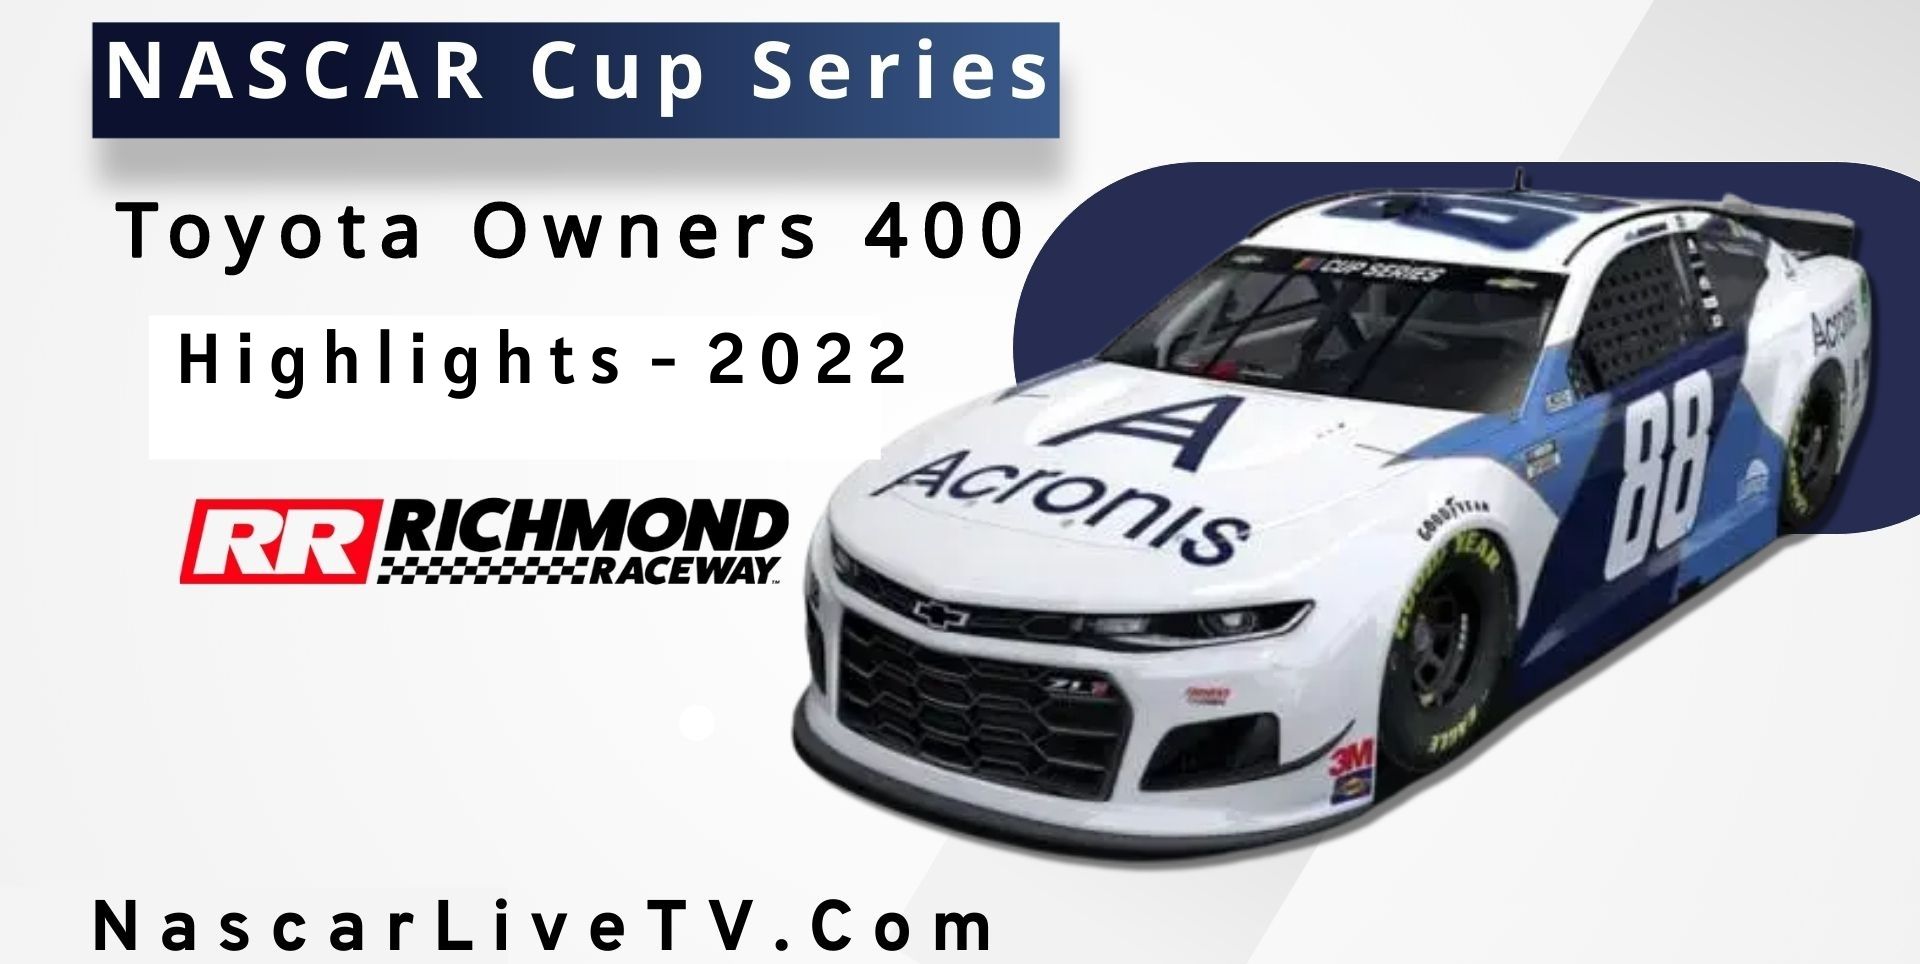 Toyota Owners 400 Highlights NASCAR Cup 2022